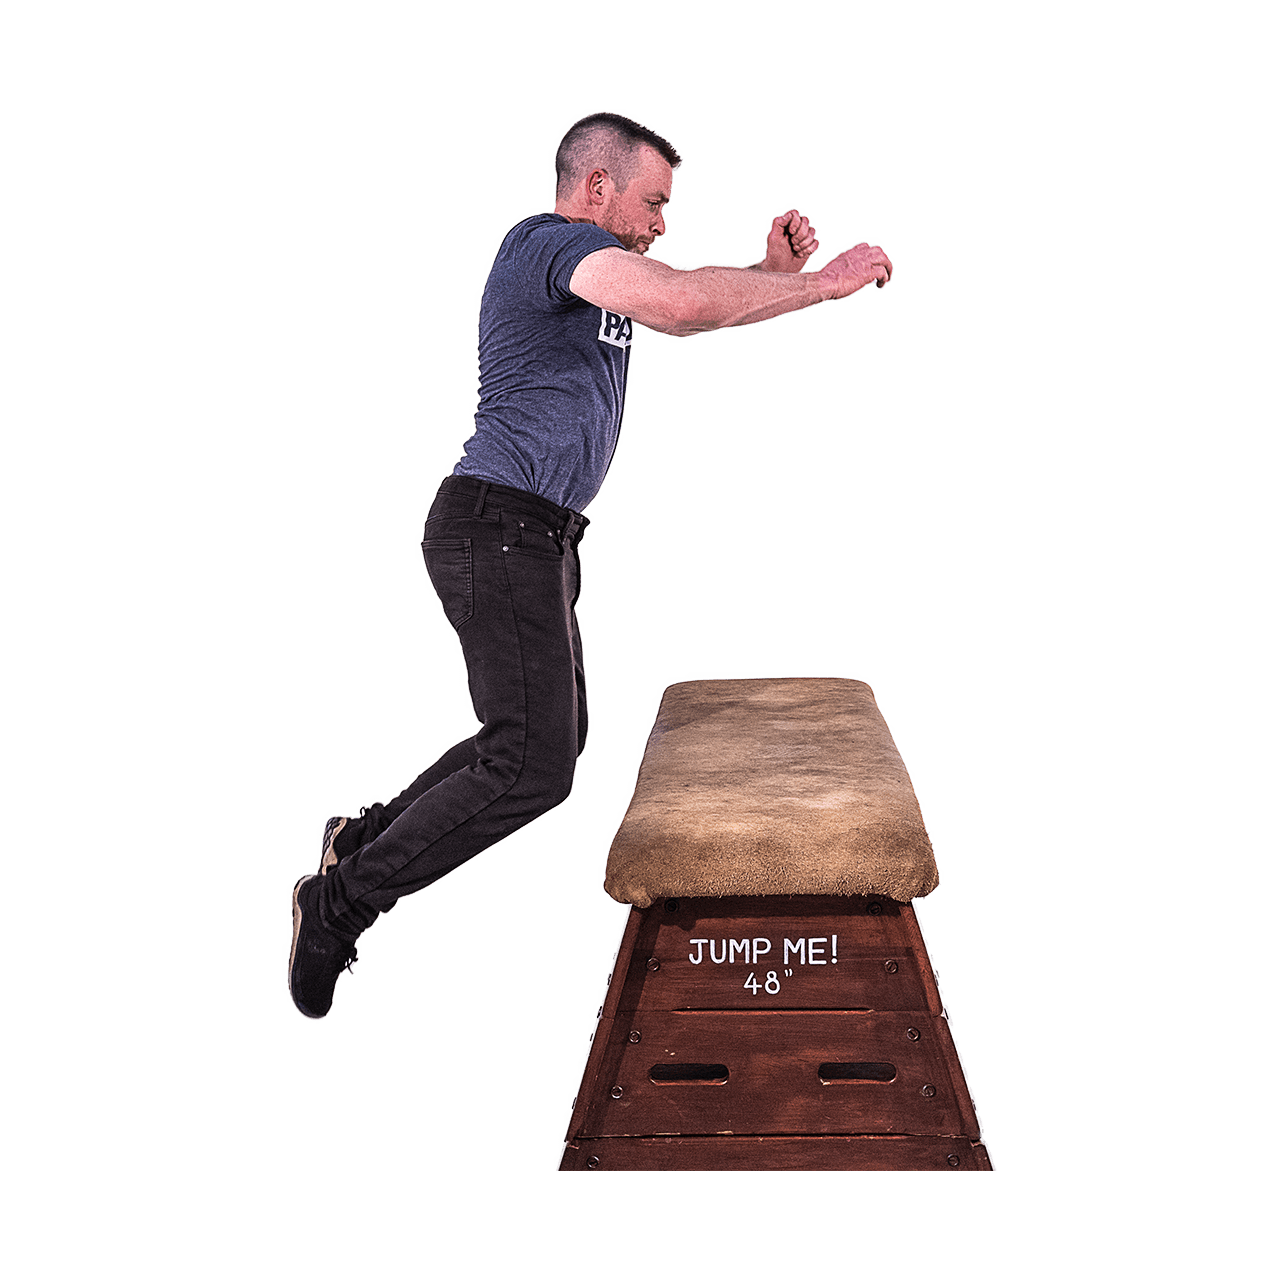 Andy does a box jump